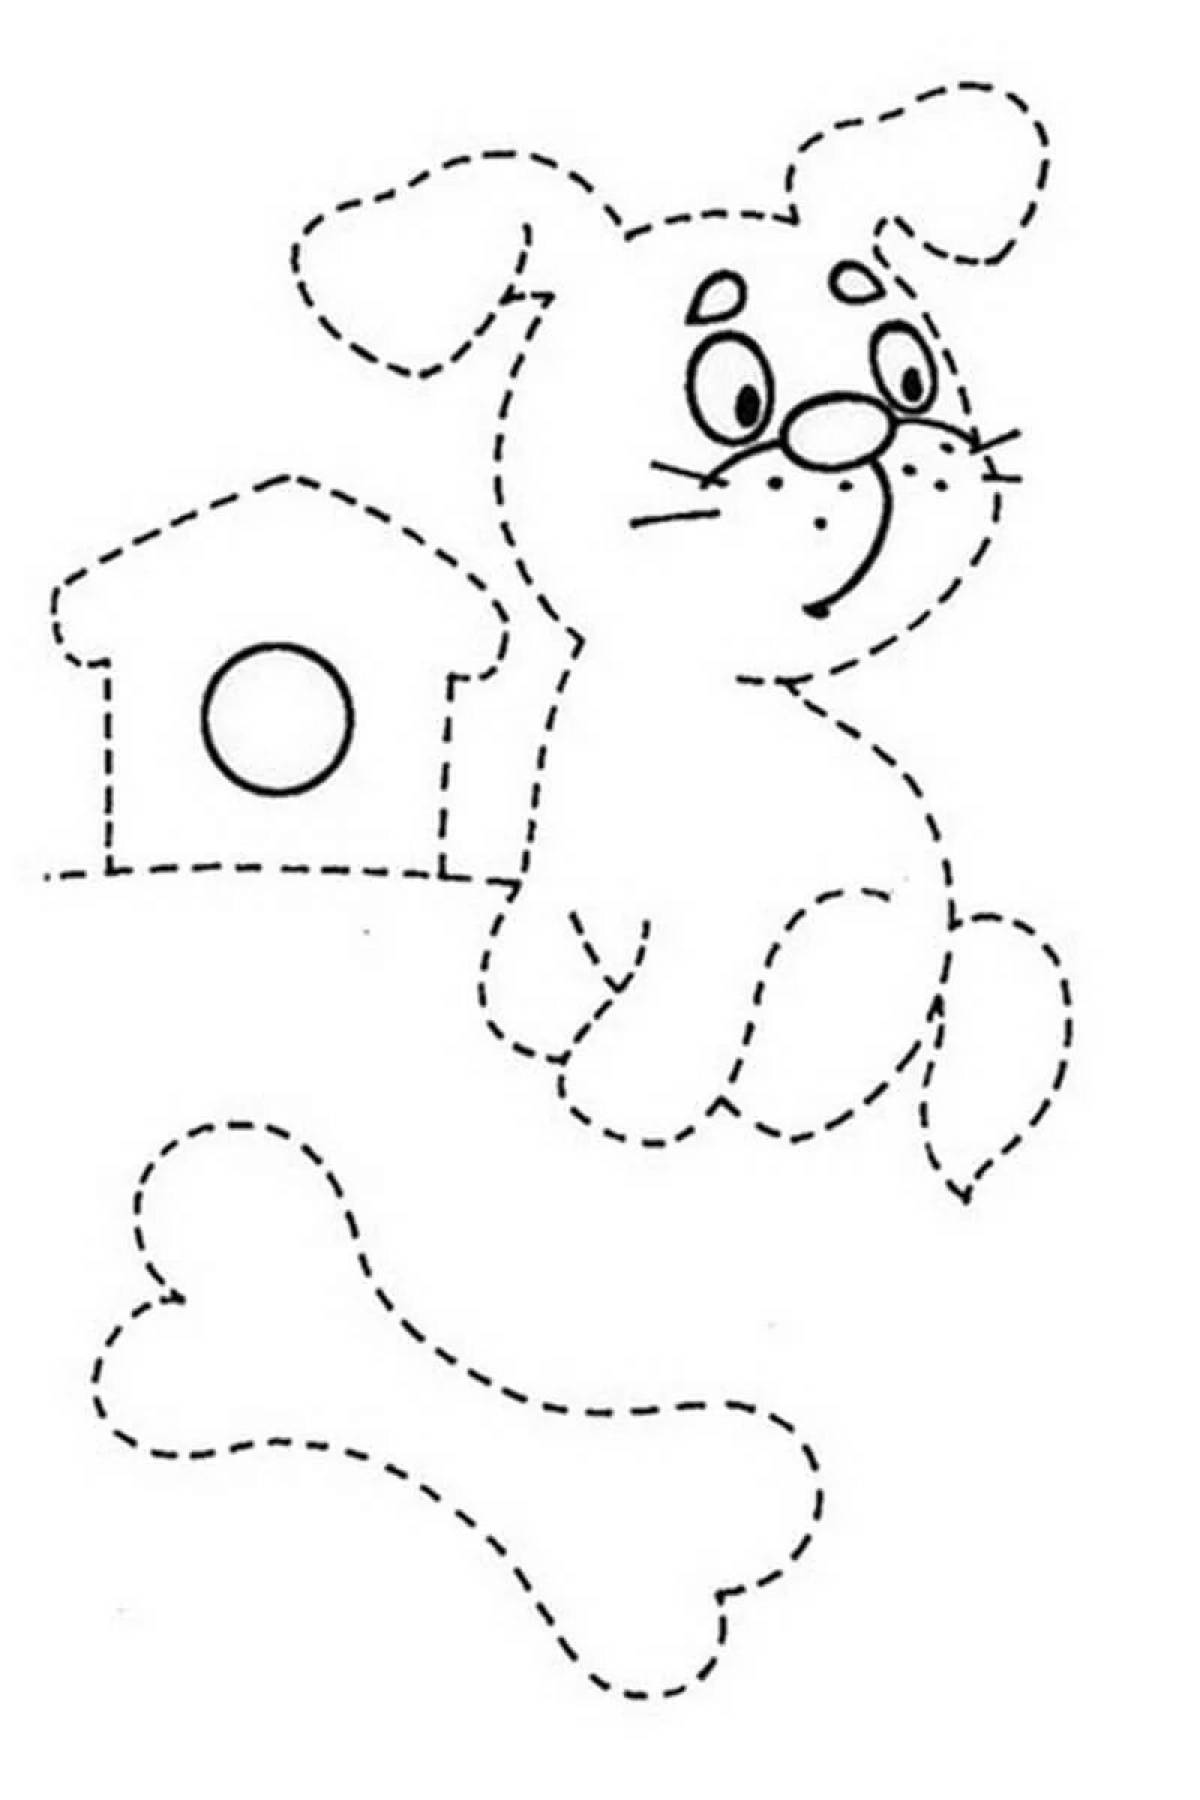 Colorful dotty imagination coloring page for kids